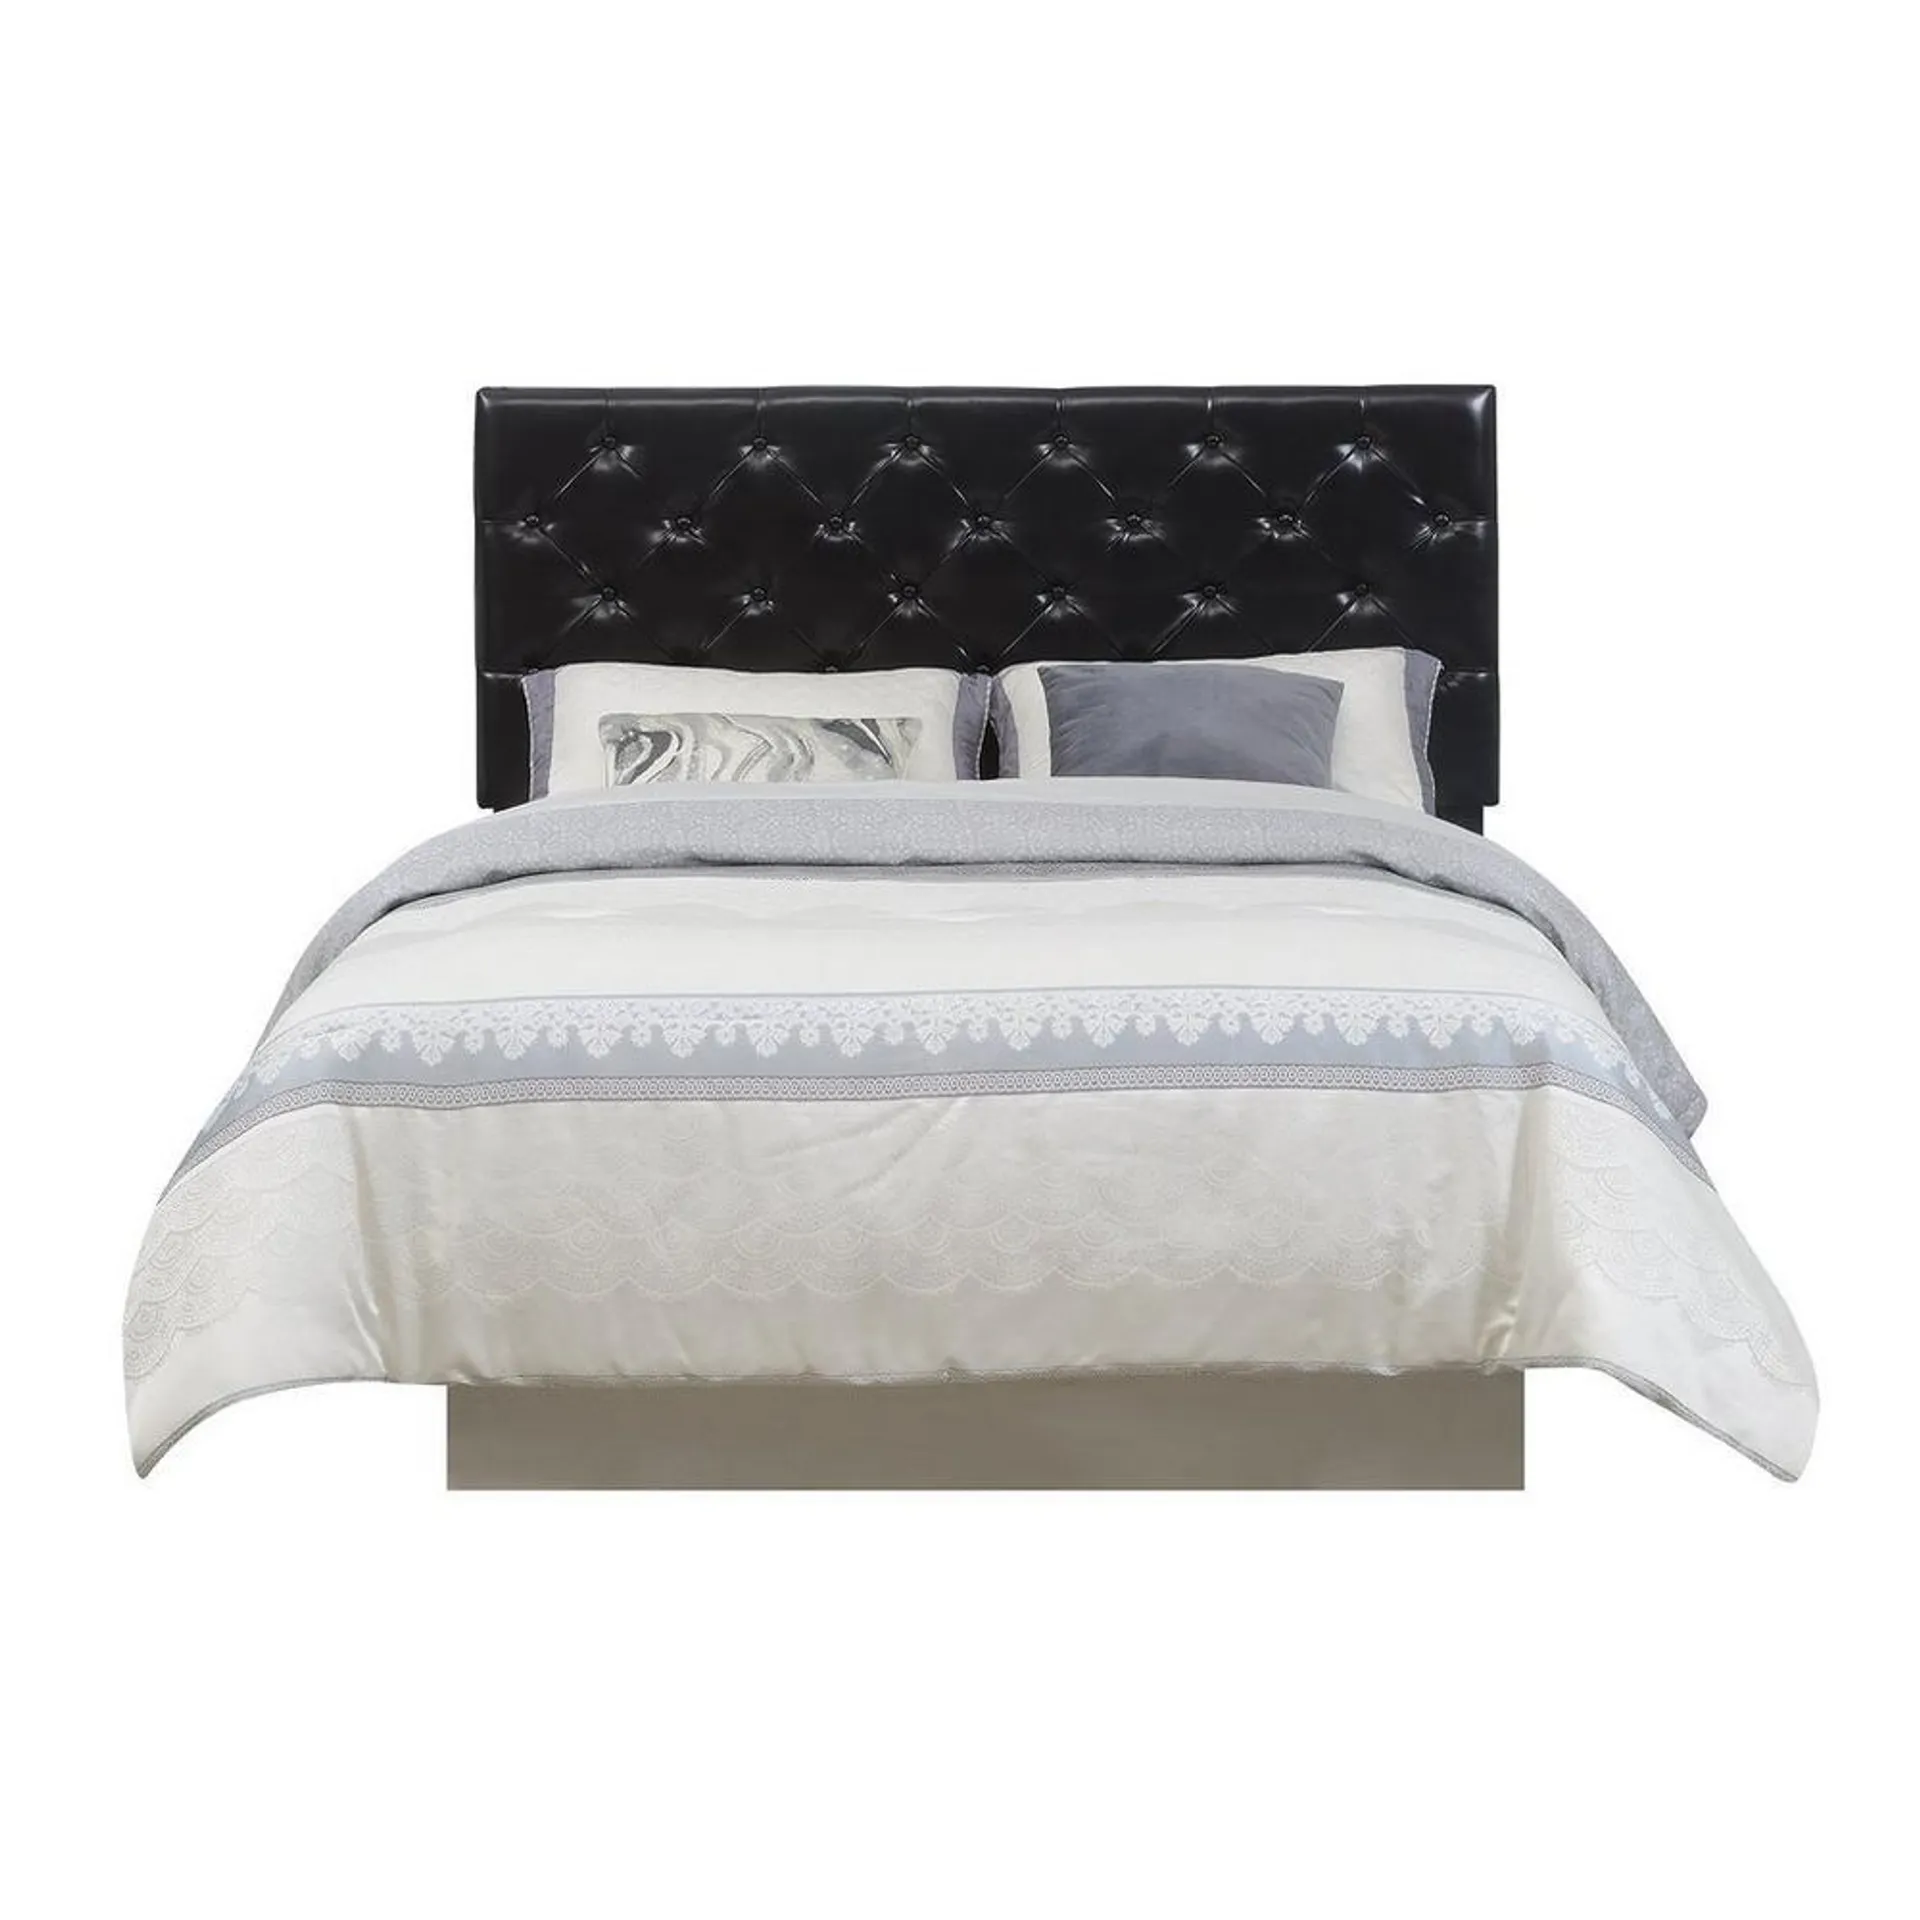 Kassel Queen Headboard w/ 12" Tight Top Upland Premium Firm Mattress & Foundation & Protective Cases